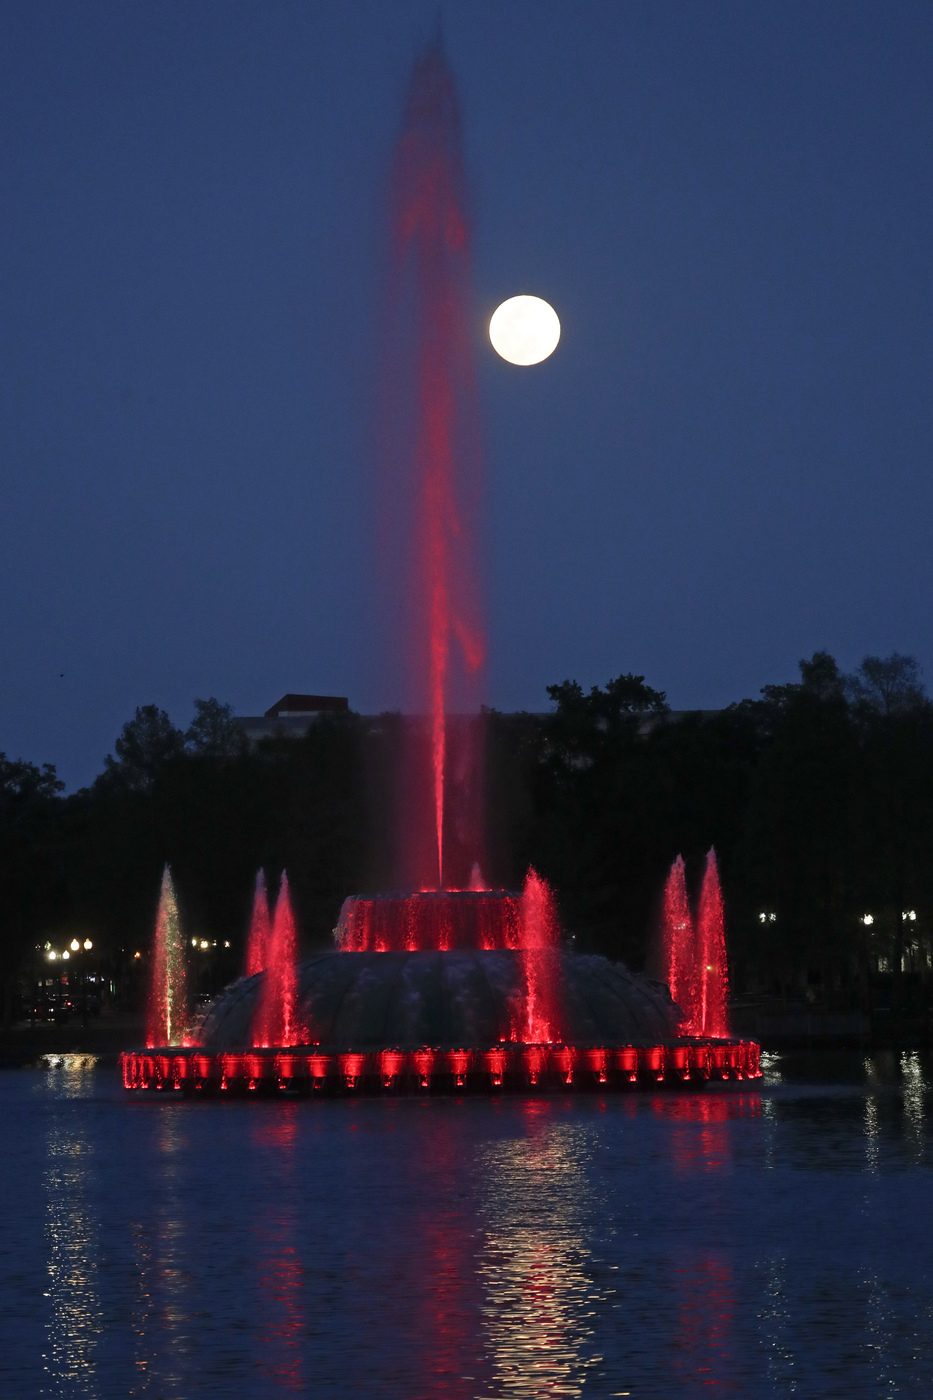 The super moon rises in the sky in front of a fountain a Lake Eola Tuesday, April 7, 2020, in (Orlando, Fla. (AP Photo/John Raoux)